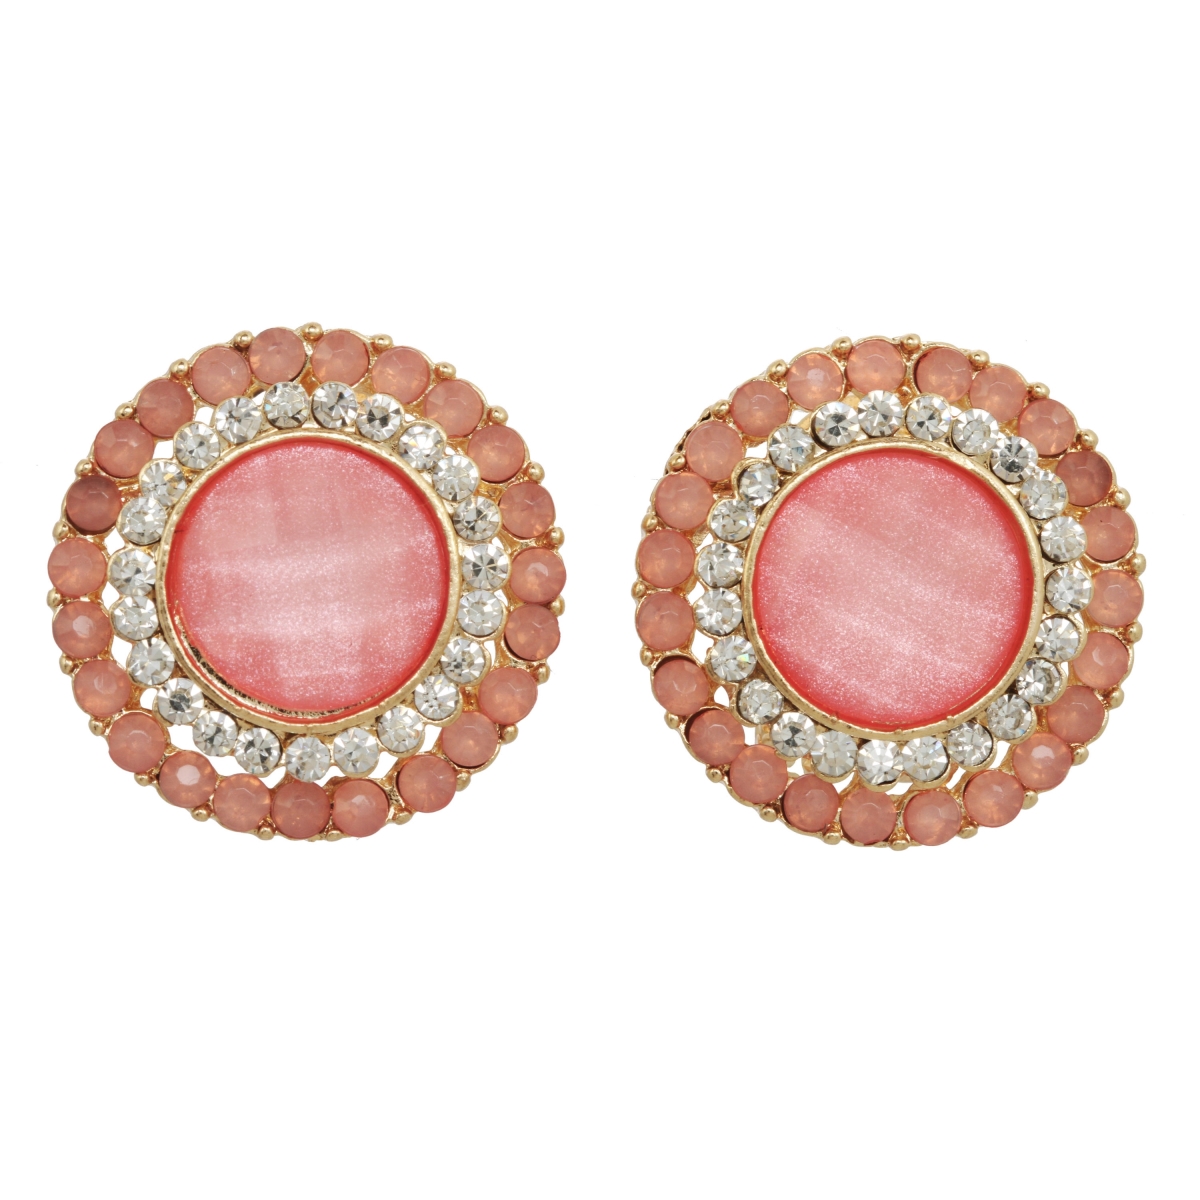 Picture of J&H Designs 9193 EP Pink Faceted Rhinestone Station Earrings